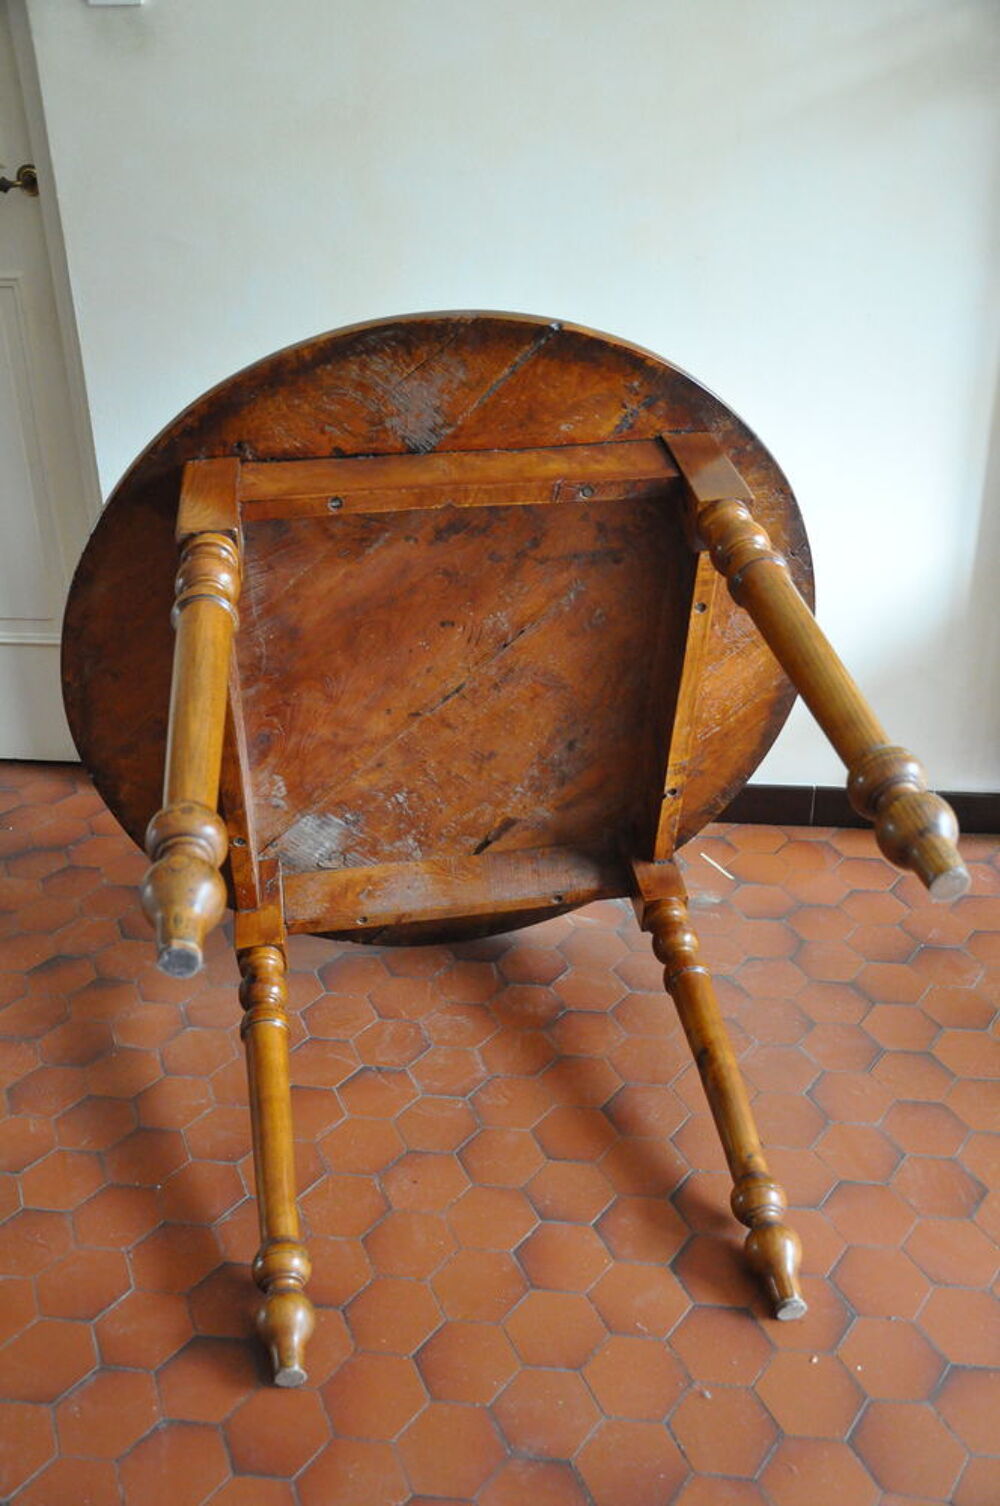 Table ronde ancienne Meubles